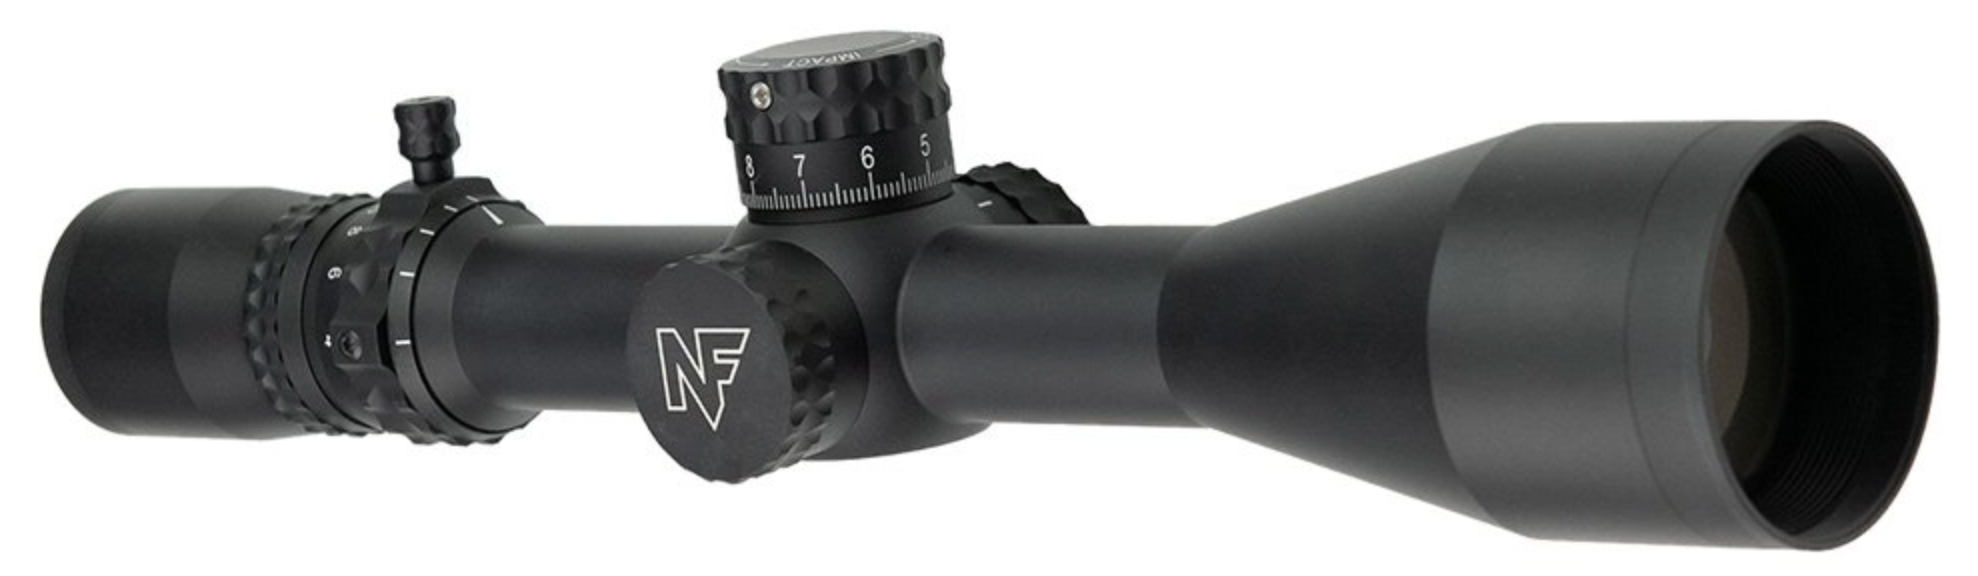 Nightforce Nx8 4-32x50fs Zs .1mil-R DIG PTL MIL -  - Mansfield Hunting & Fishing - Products to prepare for Corona Virus